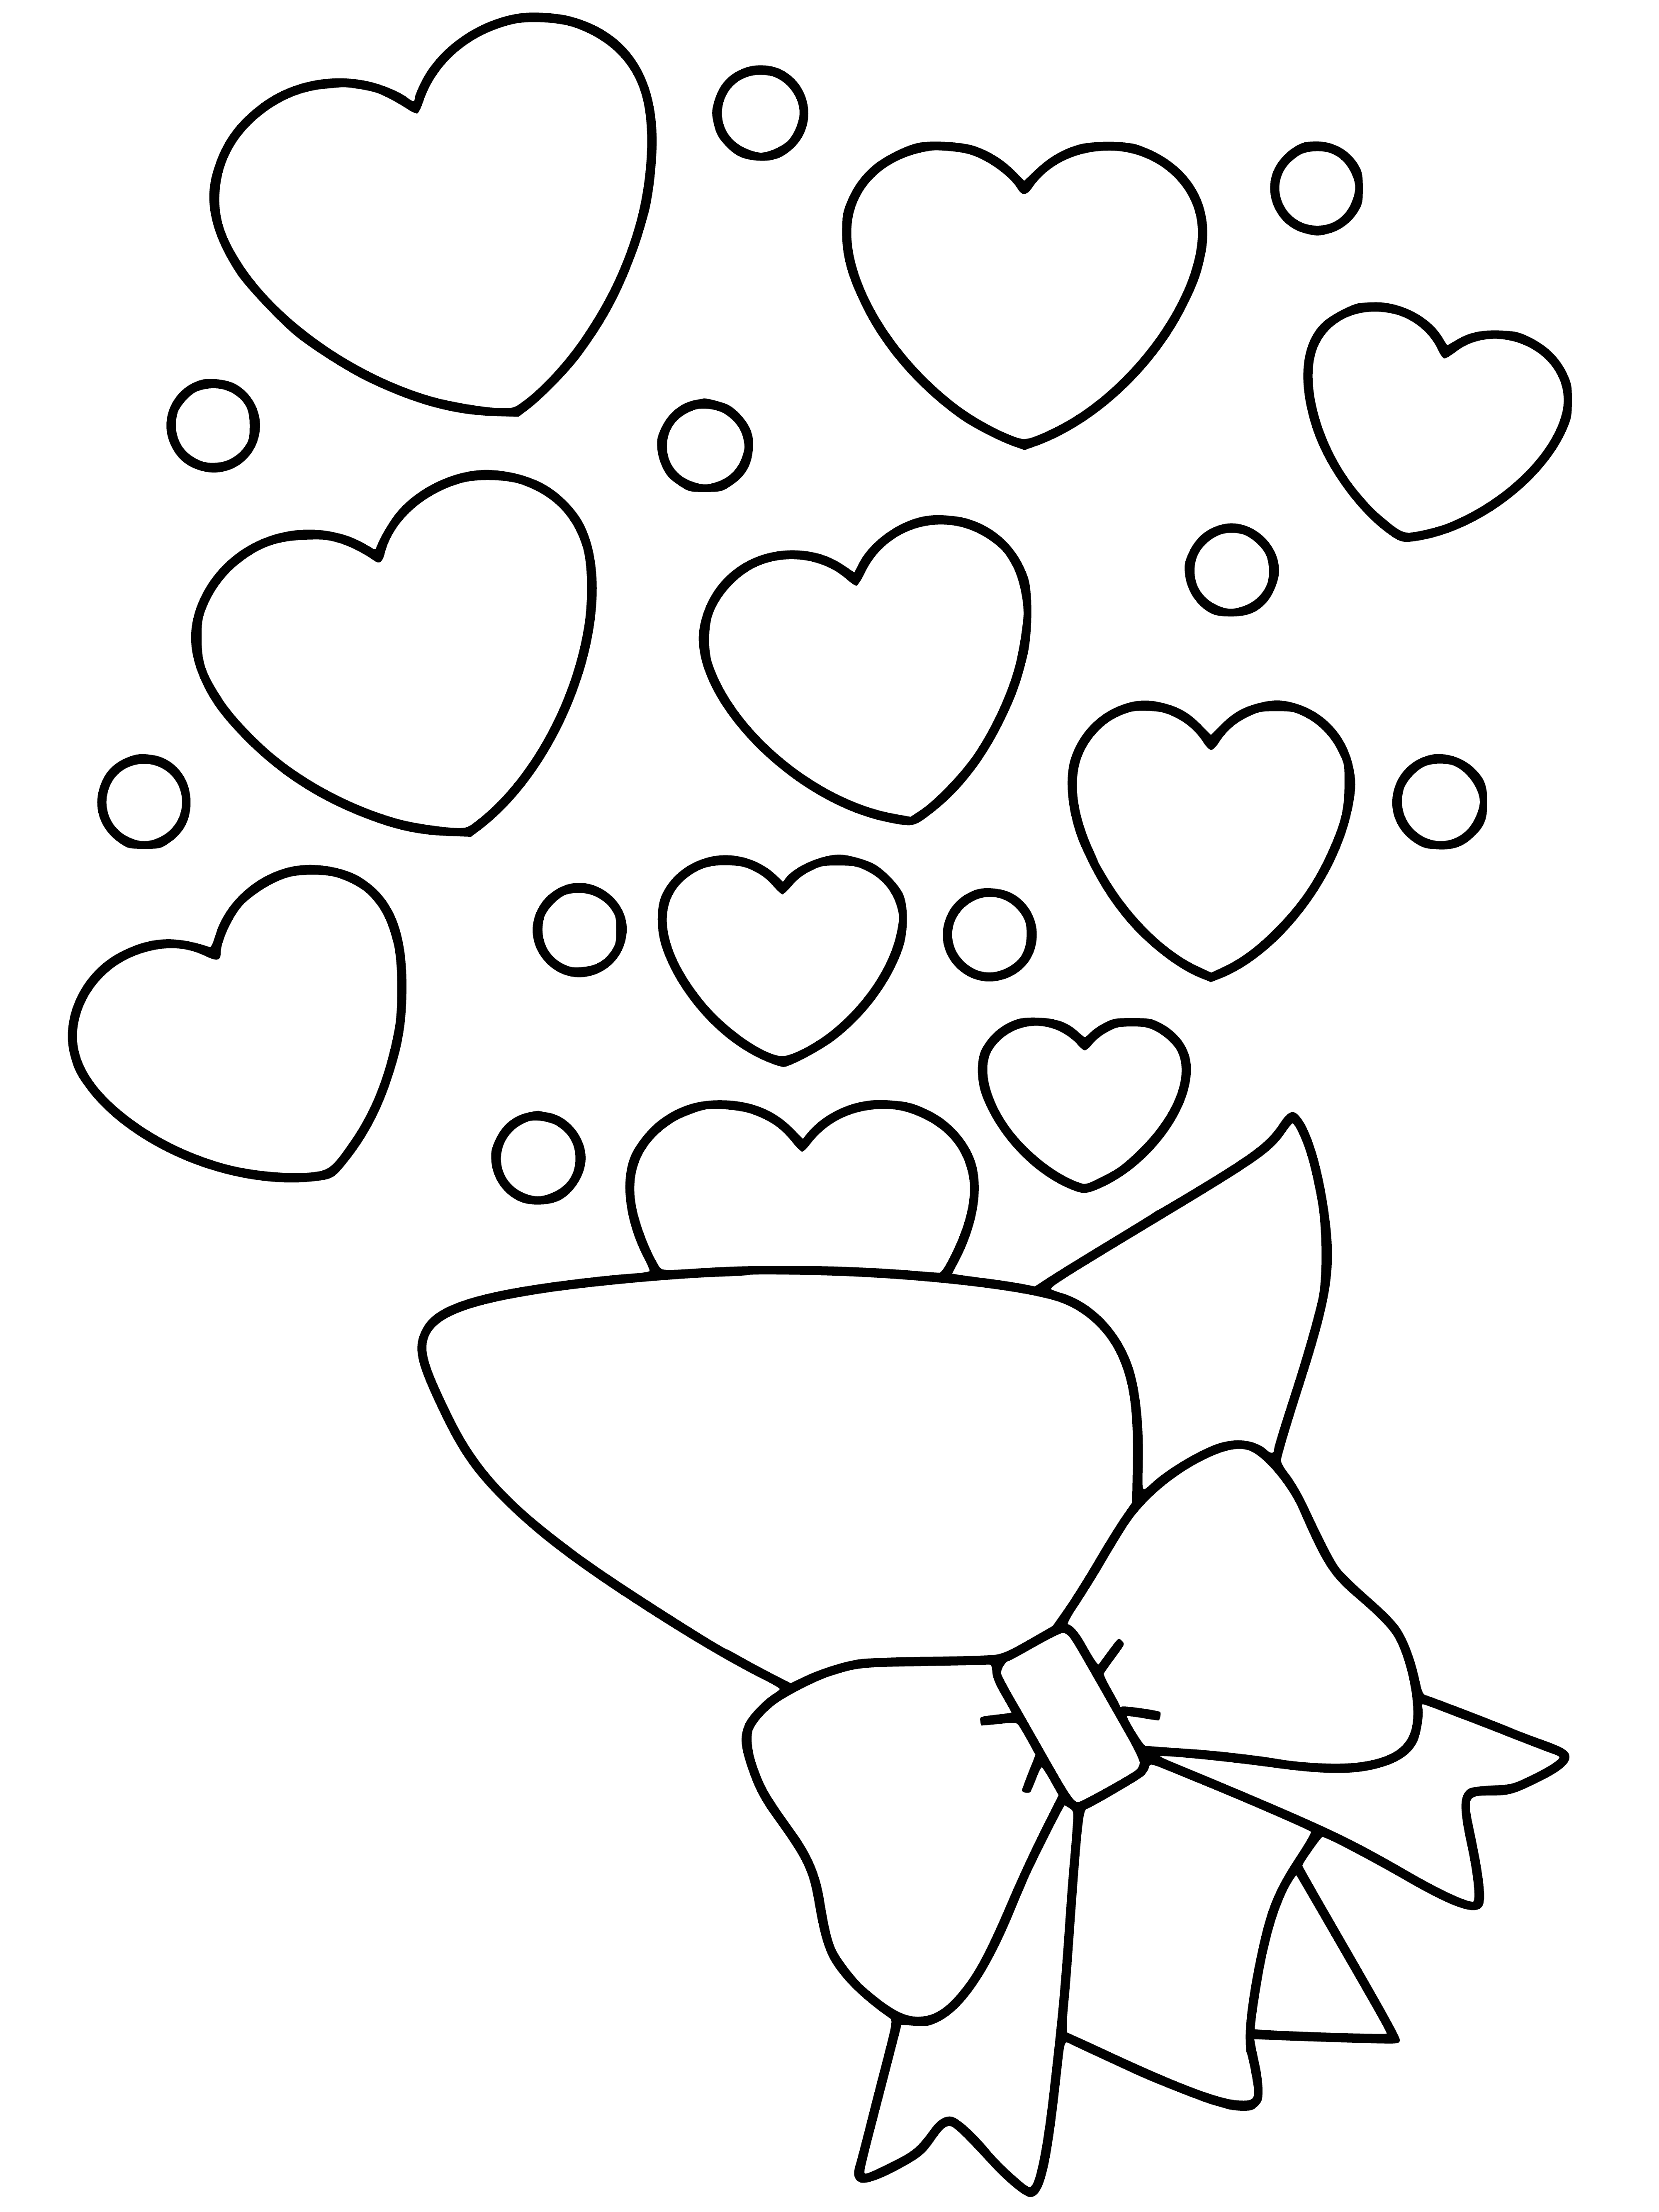 Bouquet of hearts coloring page